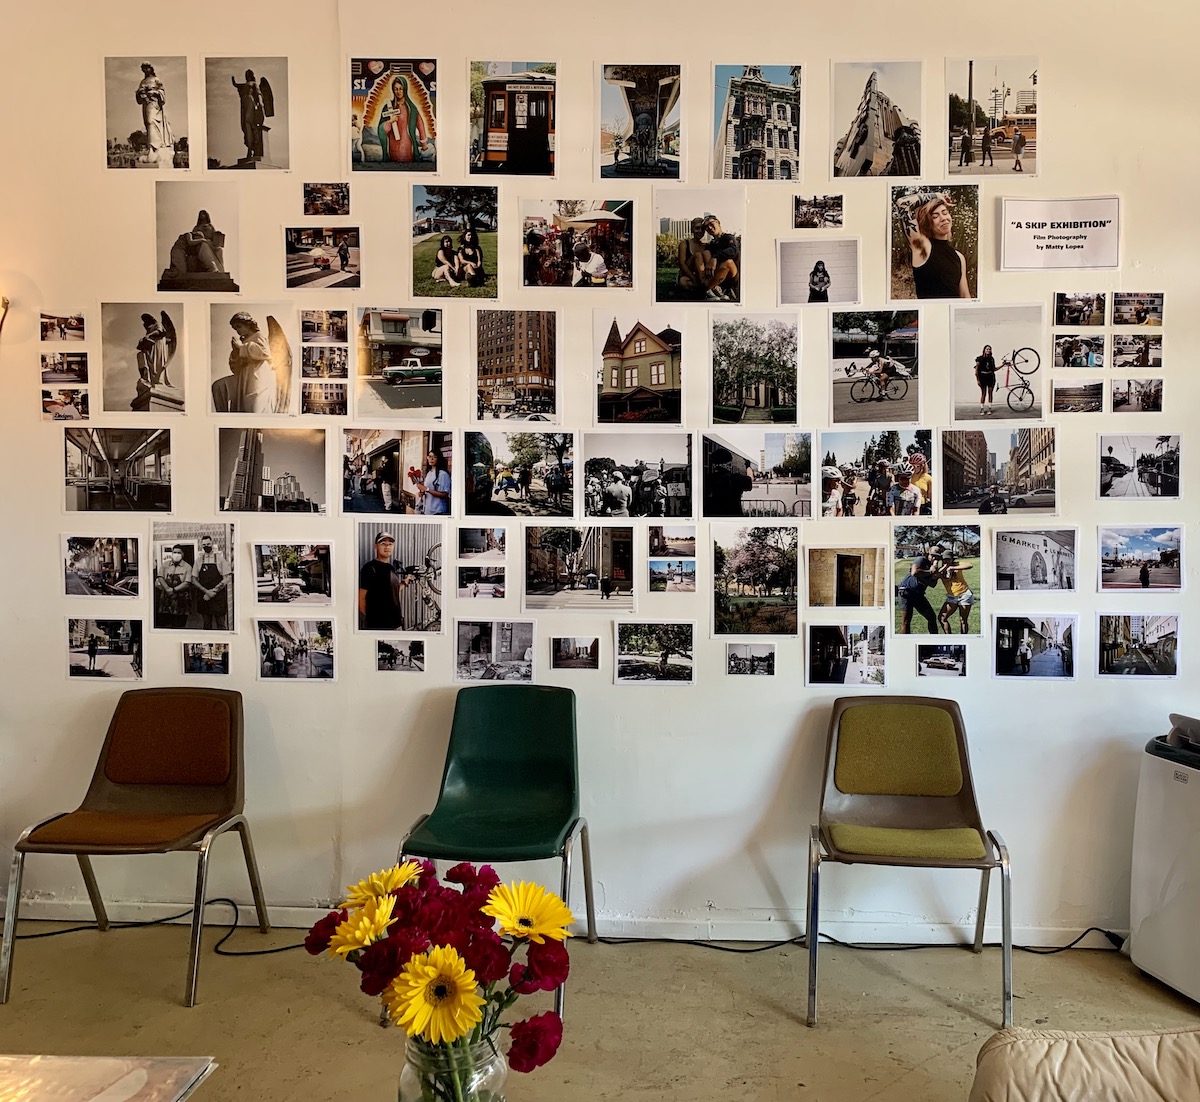 About 50 photos displayed frameless on a white wall, above three plastic chairs.